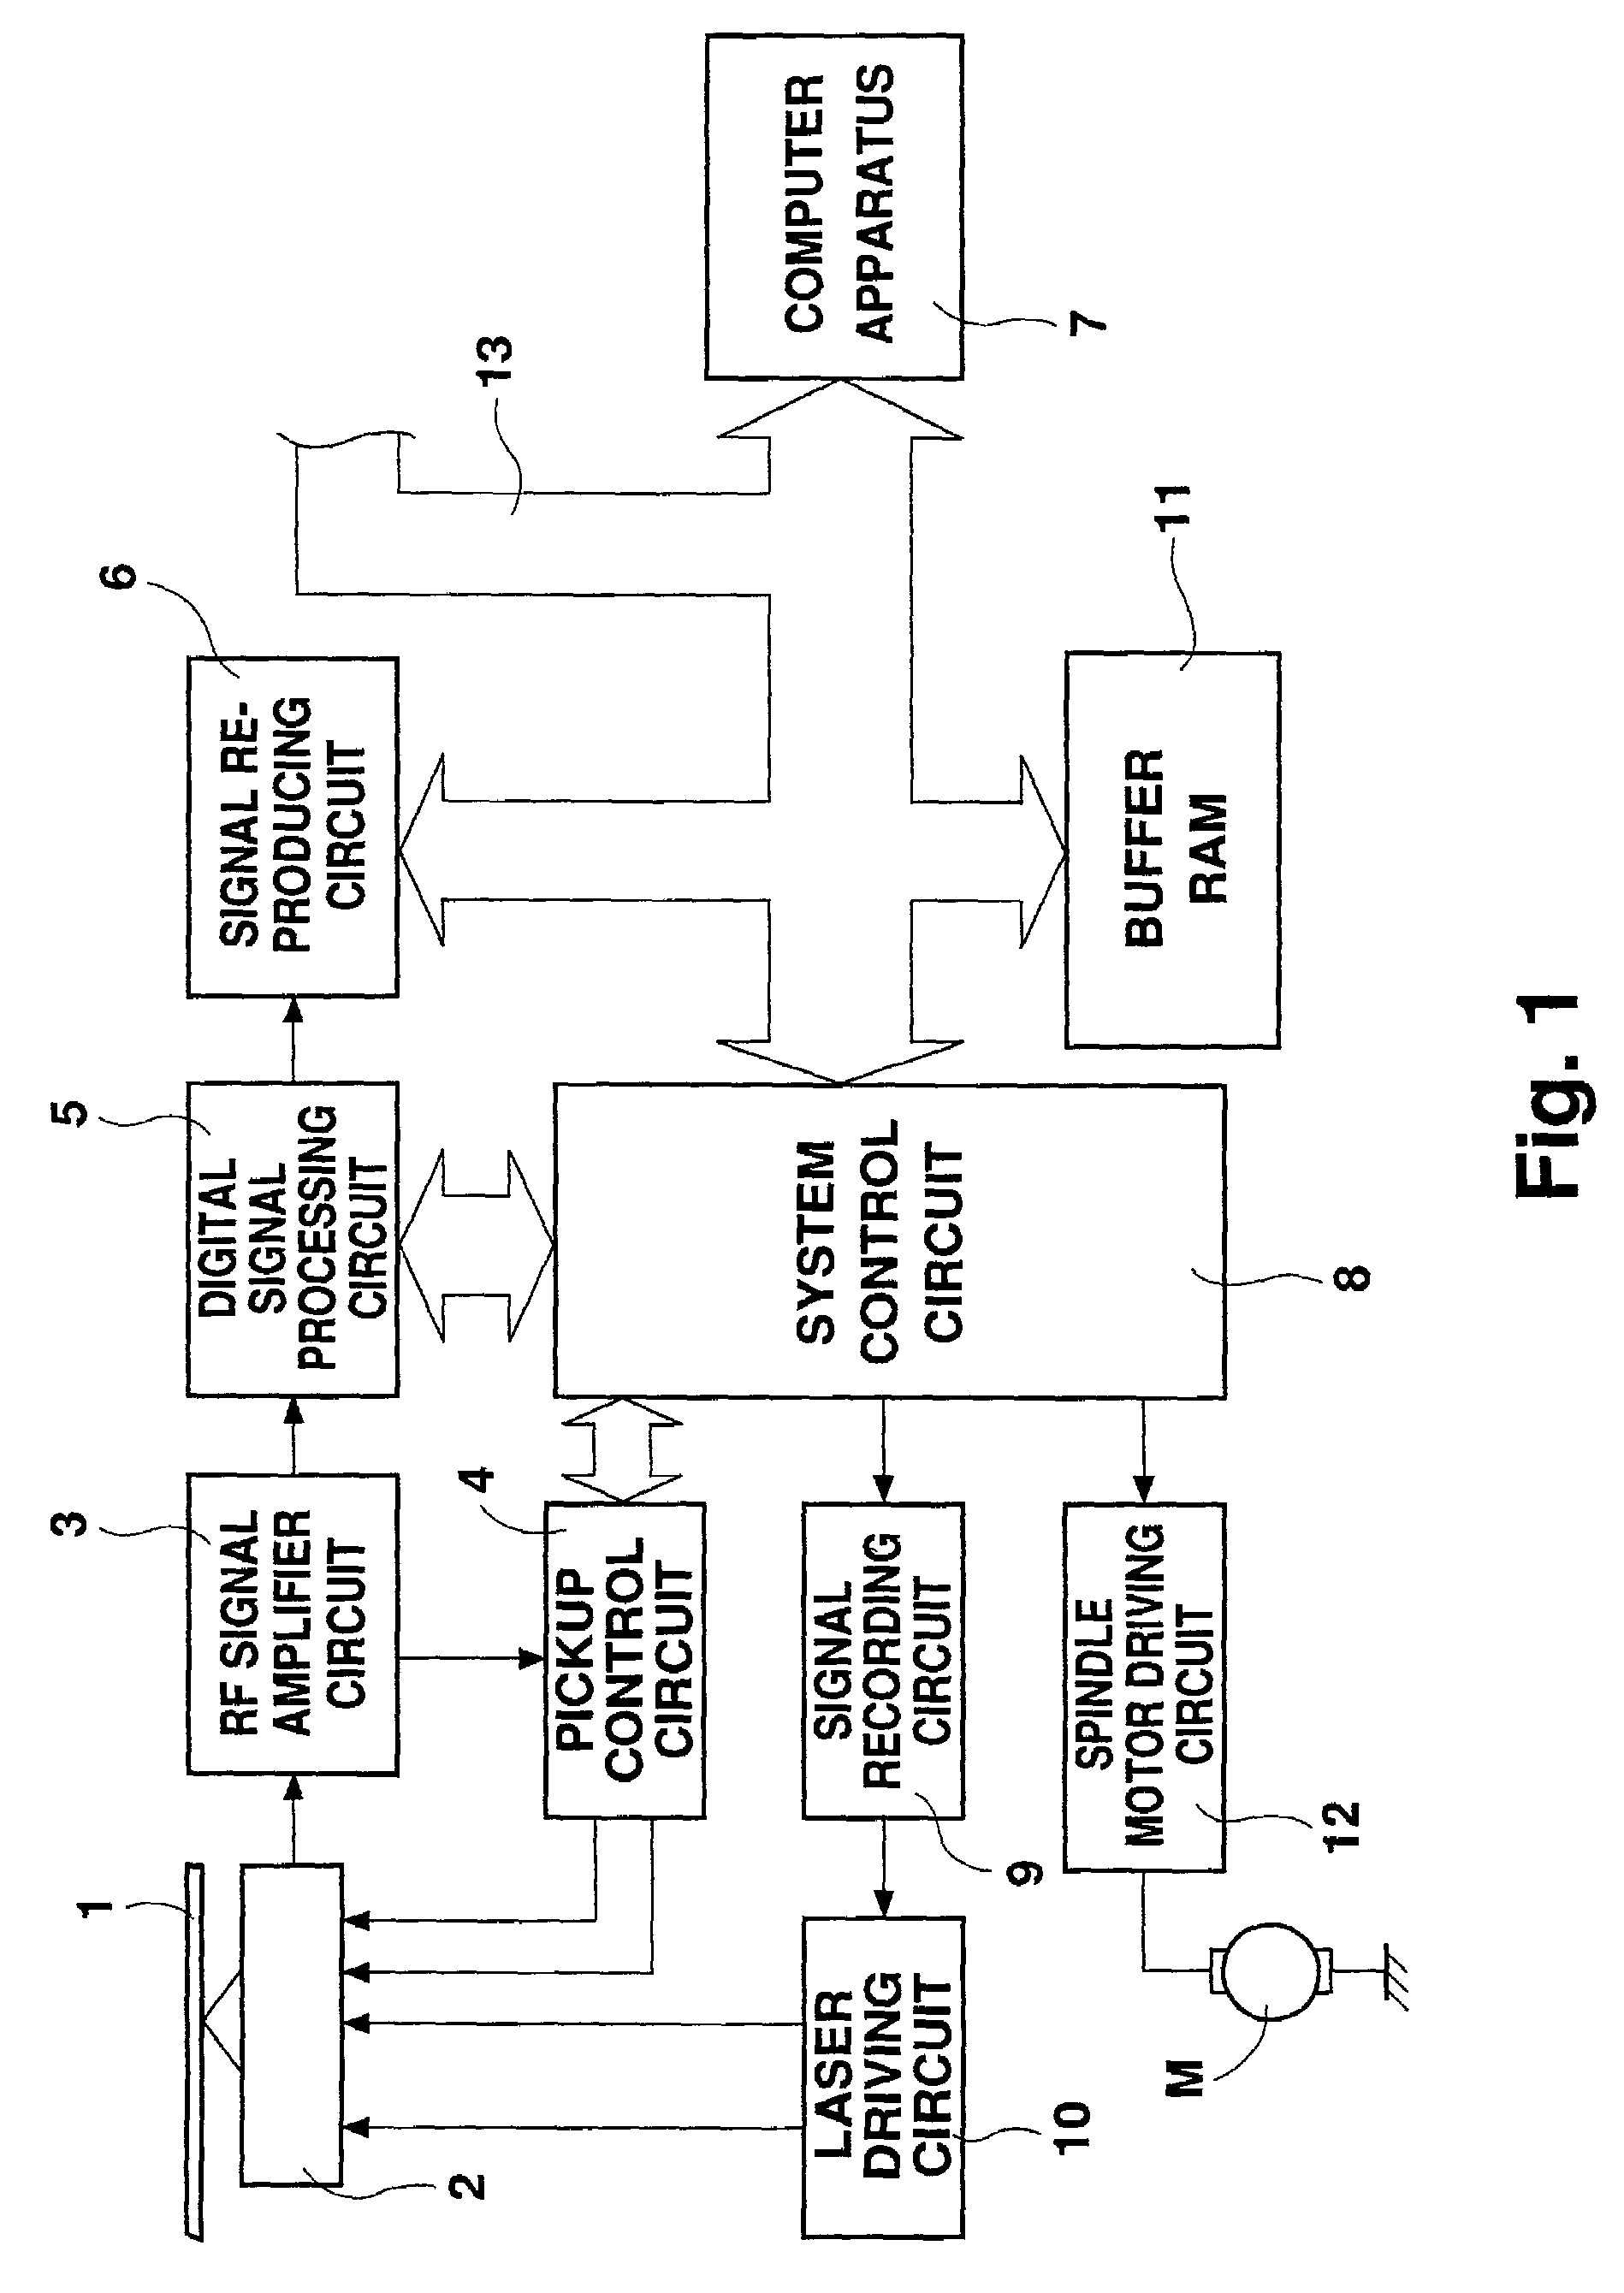 Optical disk recording/reproducing method and apparatus in which recording properties of the disk are detected when recording speed is changed